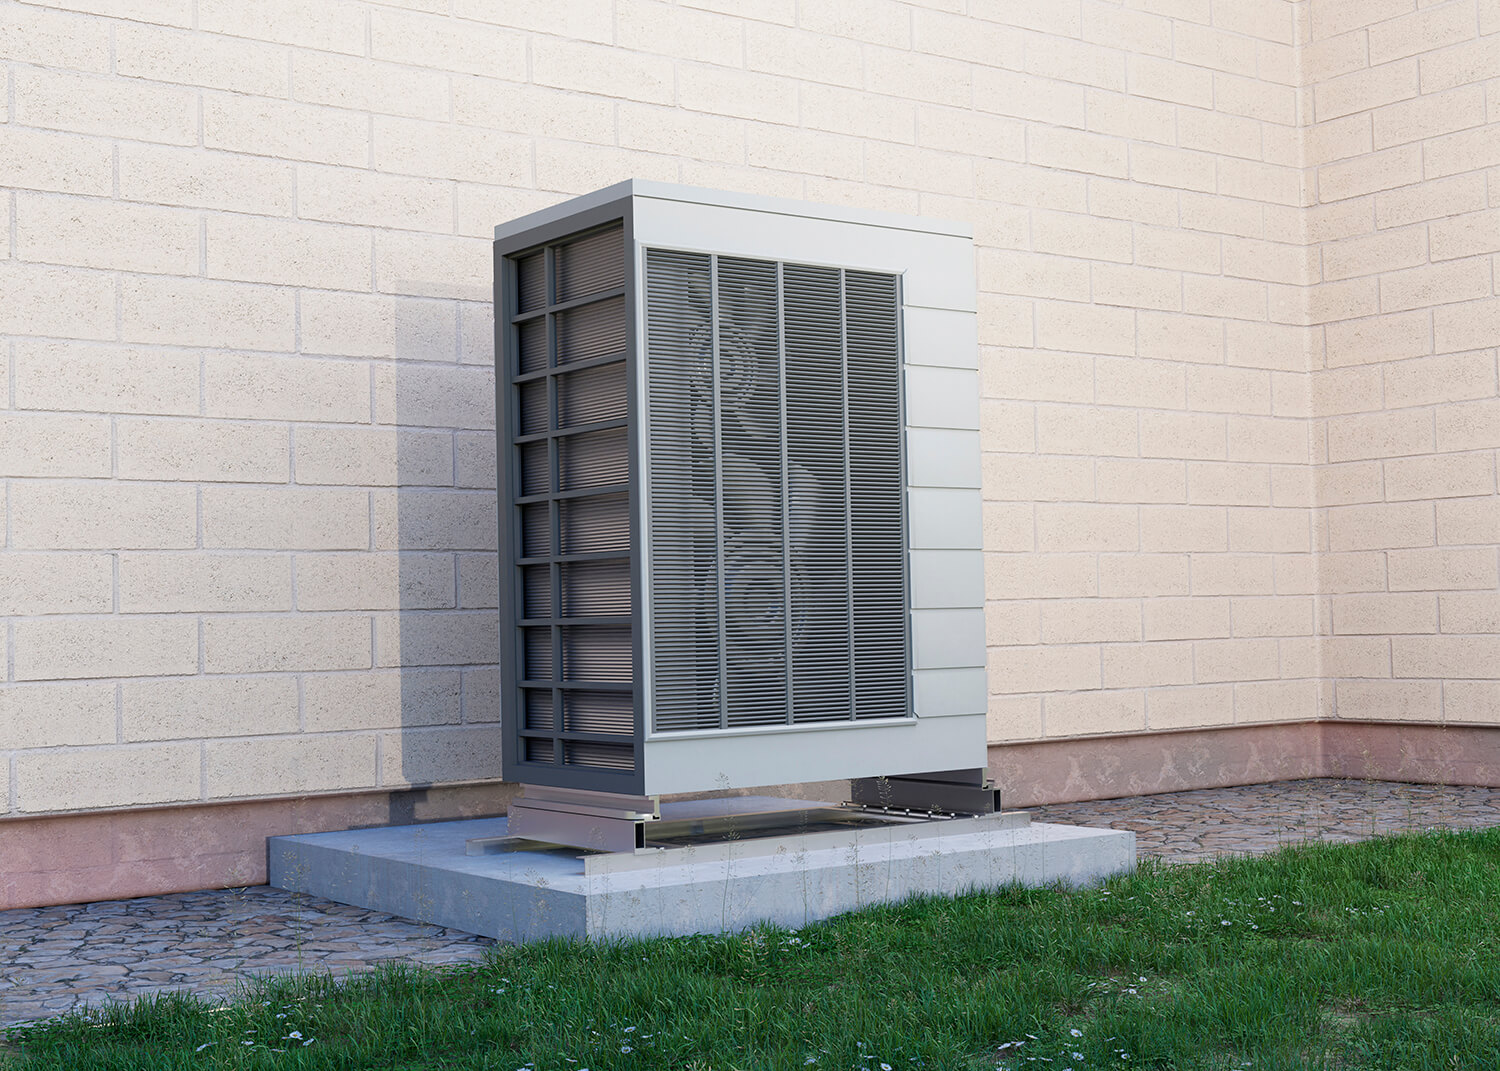 Why do air conditioners stop working at inconvenient times?